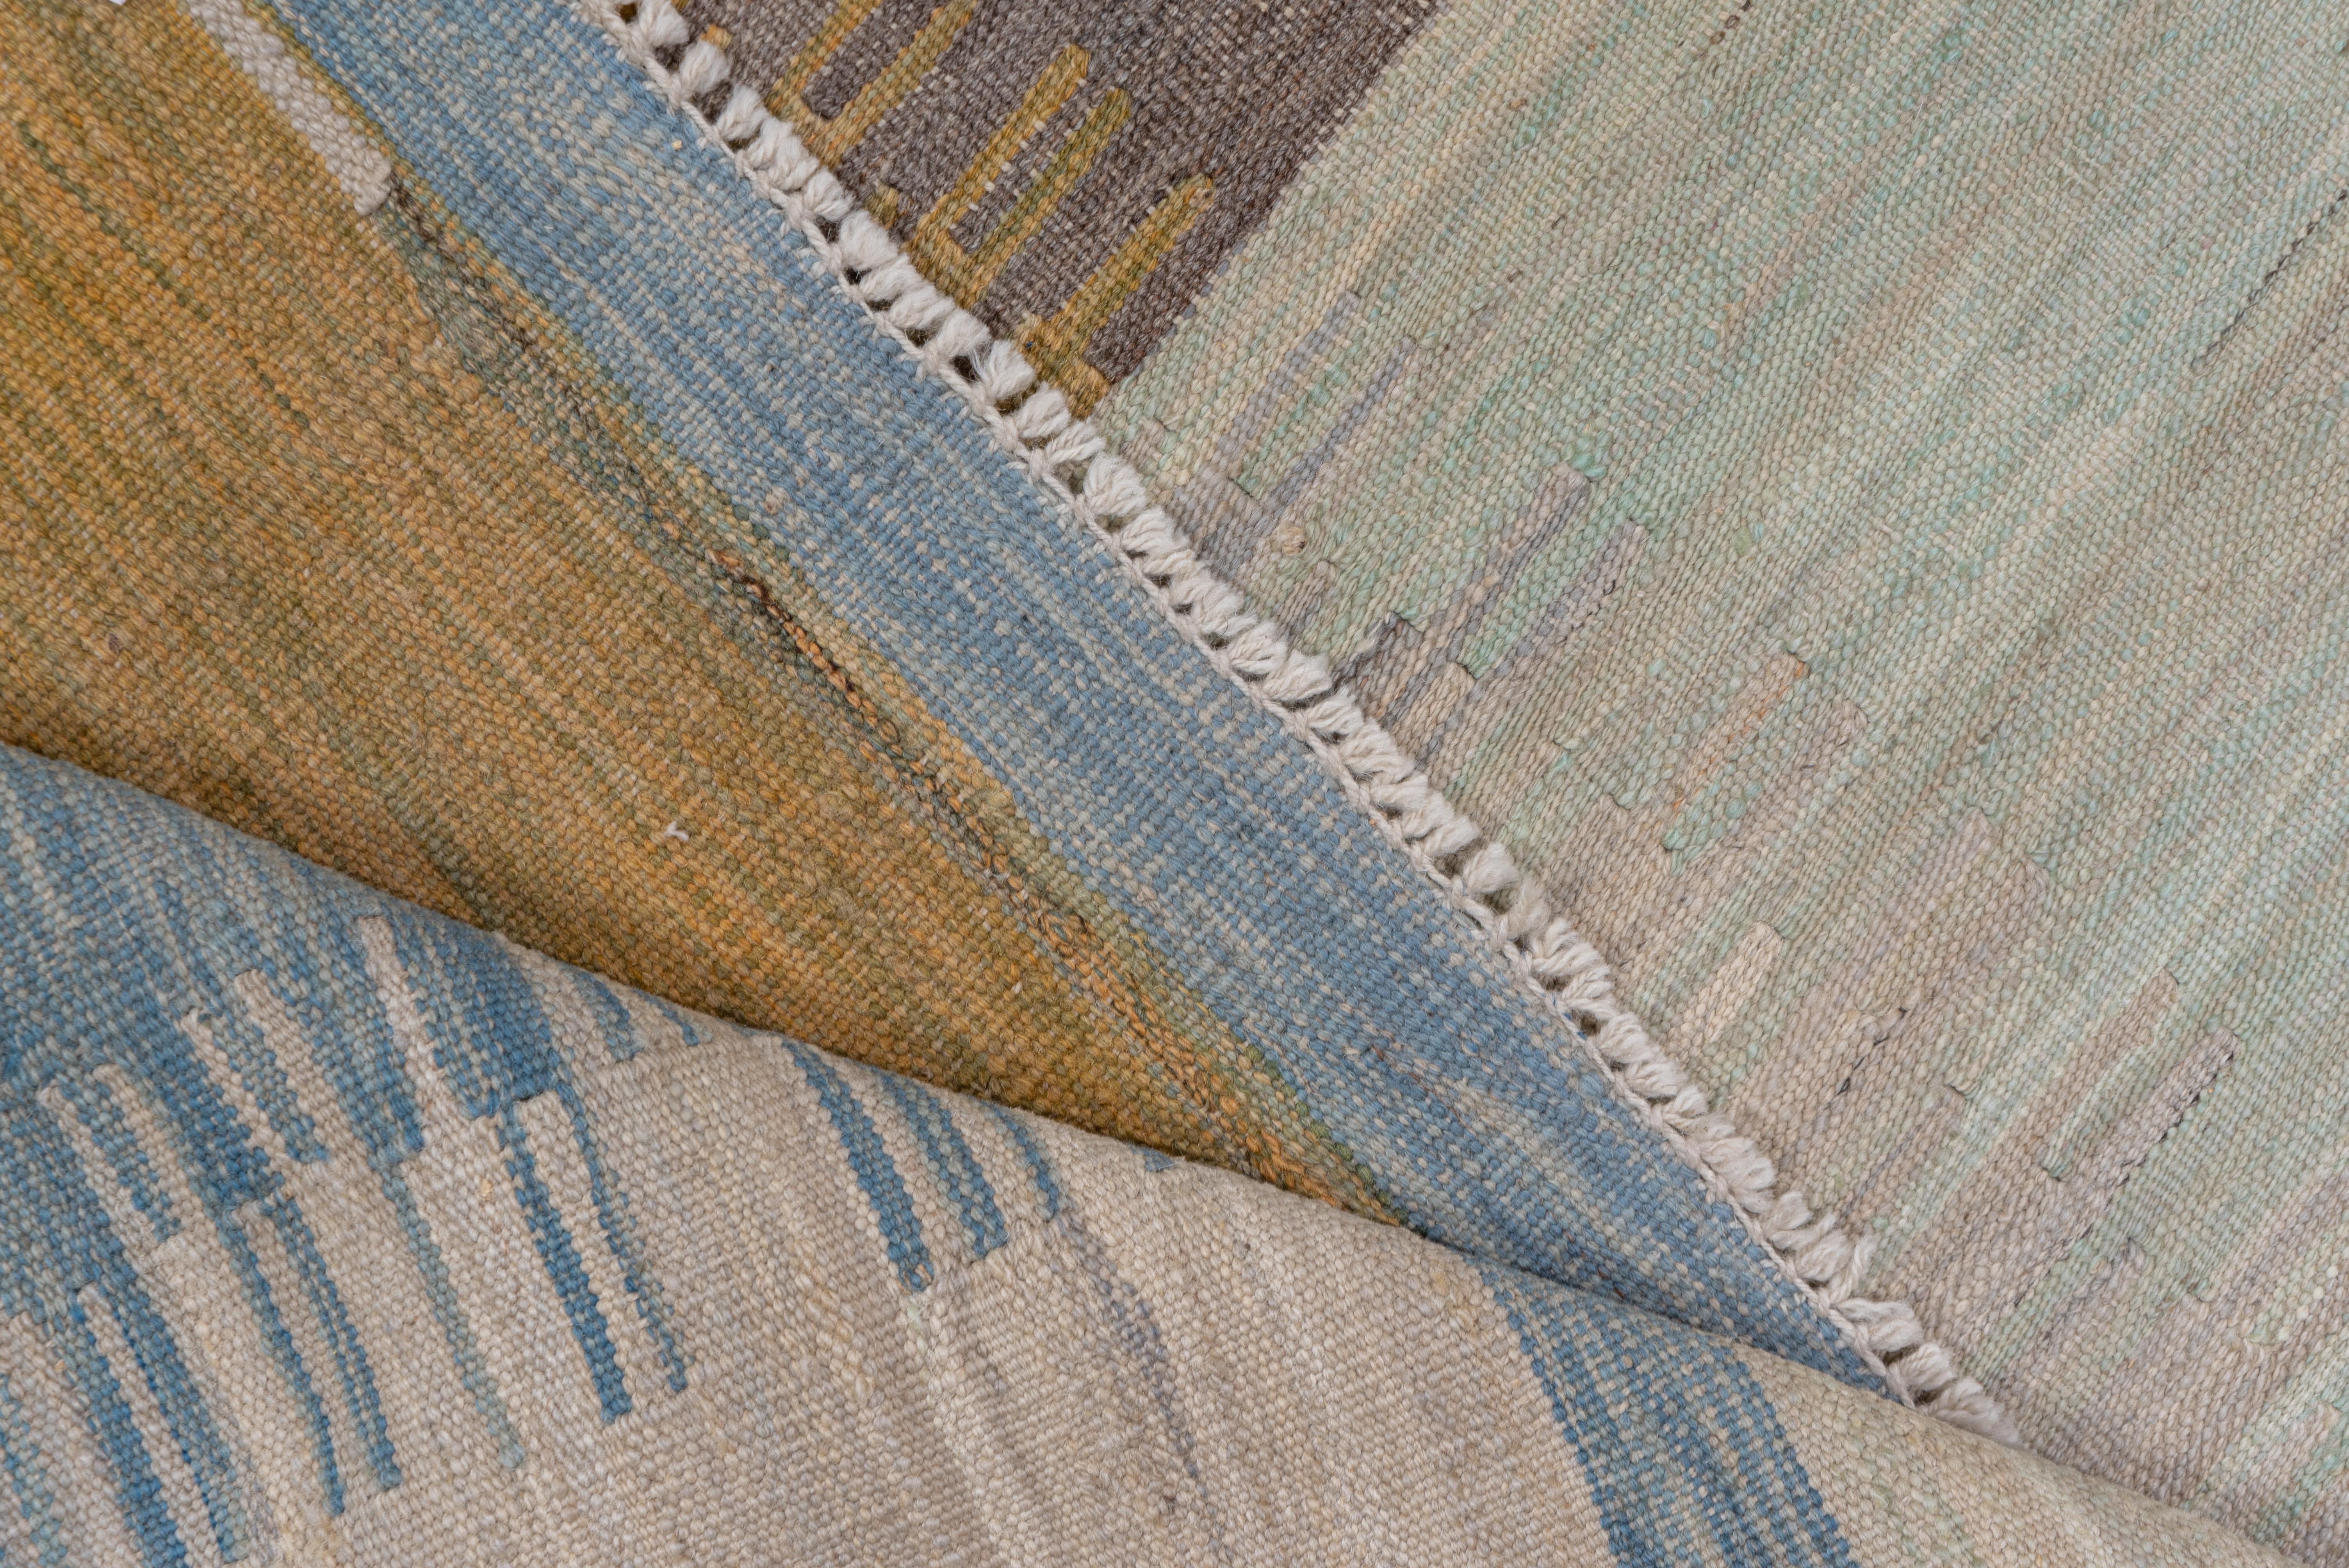 A nearly nine row pattern of variously fringed rectangles and squares gives a shimmering pattern of abrashed -light blue, brown, ivory and citron. The irregular comb edges show the color transitions with slit tapestry weave construction. As new